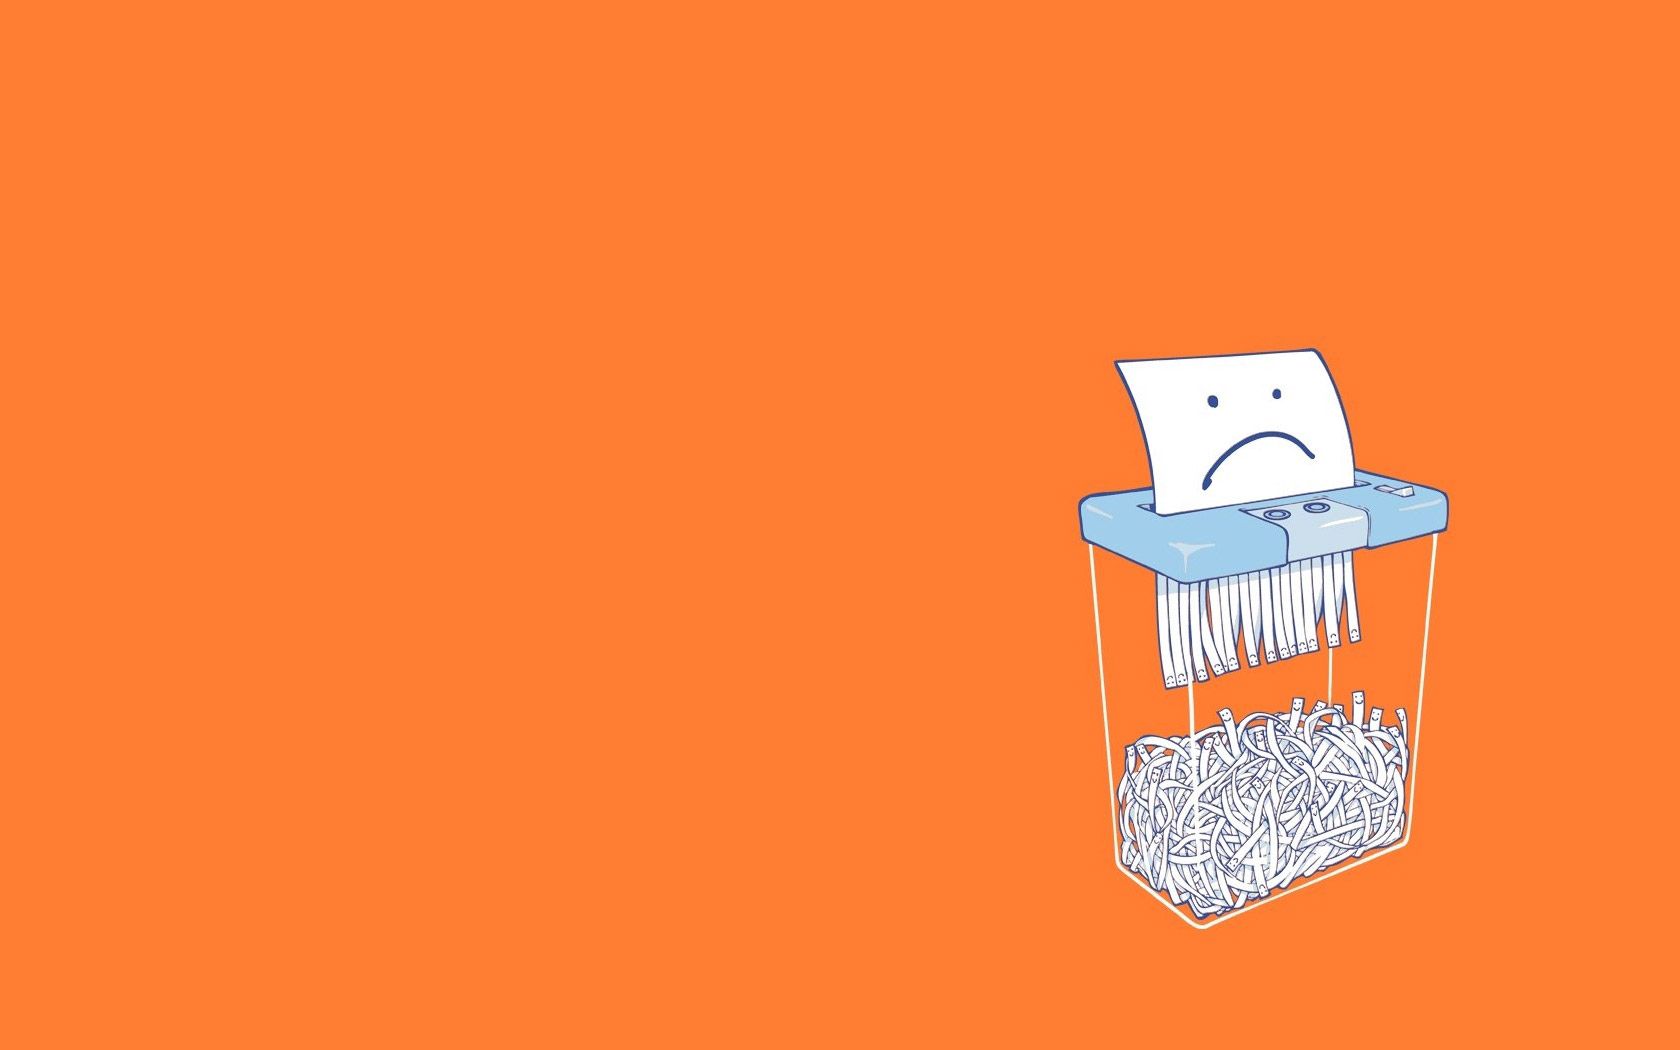 A paper shredder with a sad face on it - Minimalist